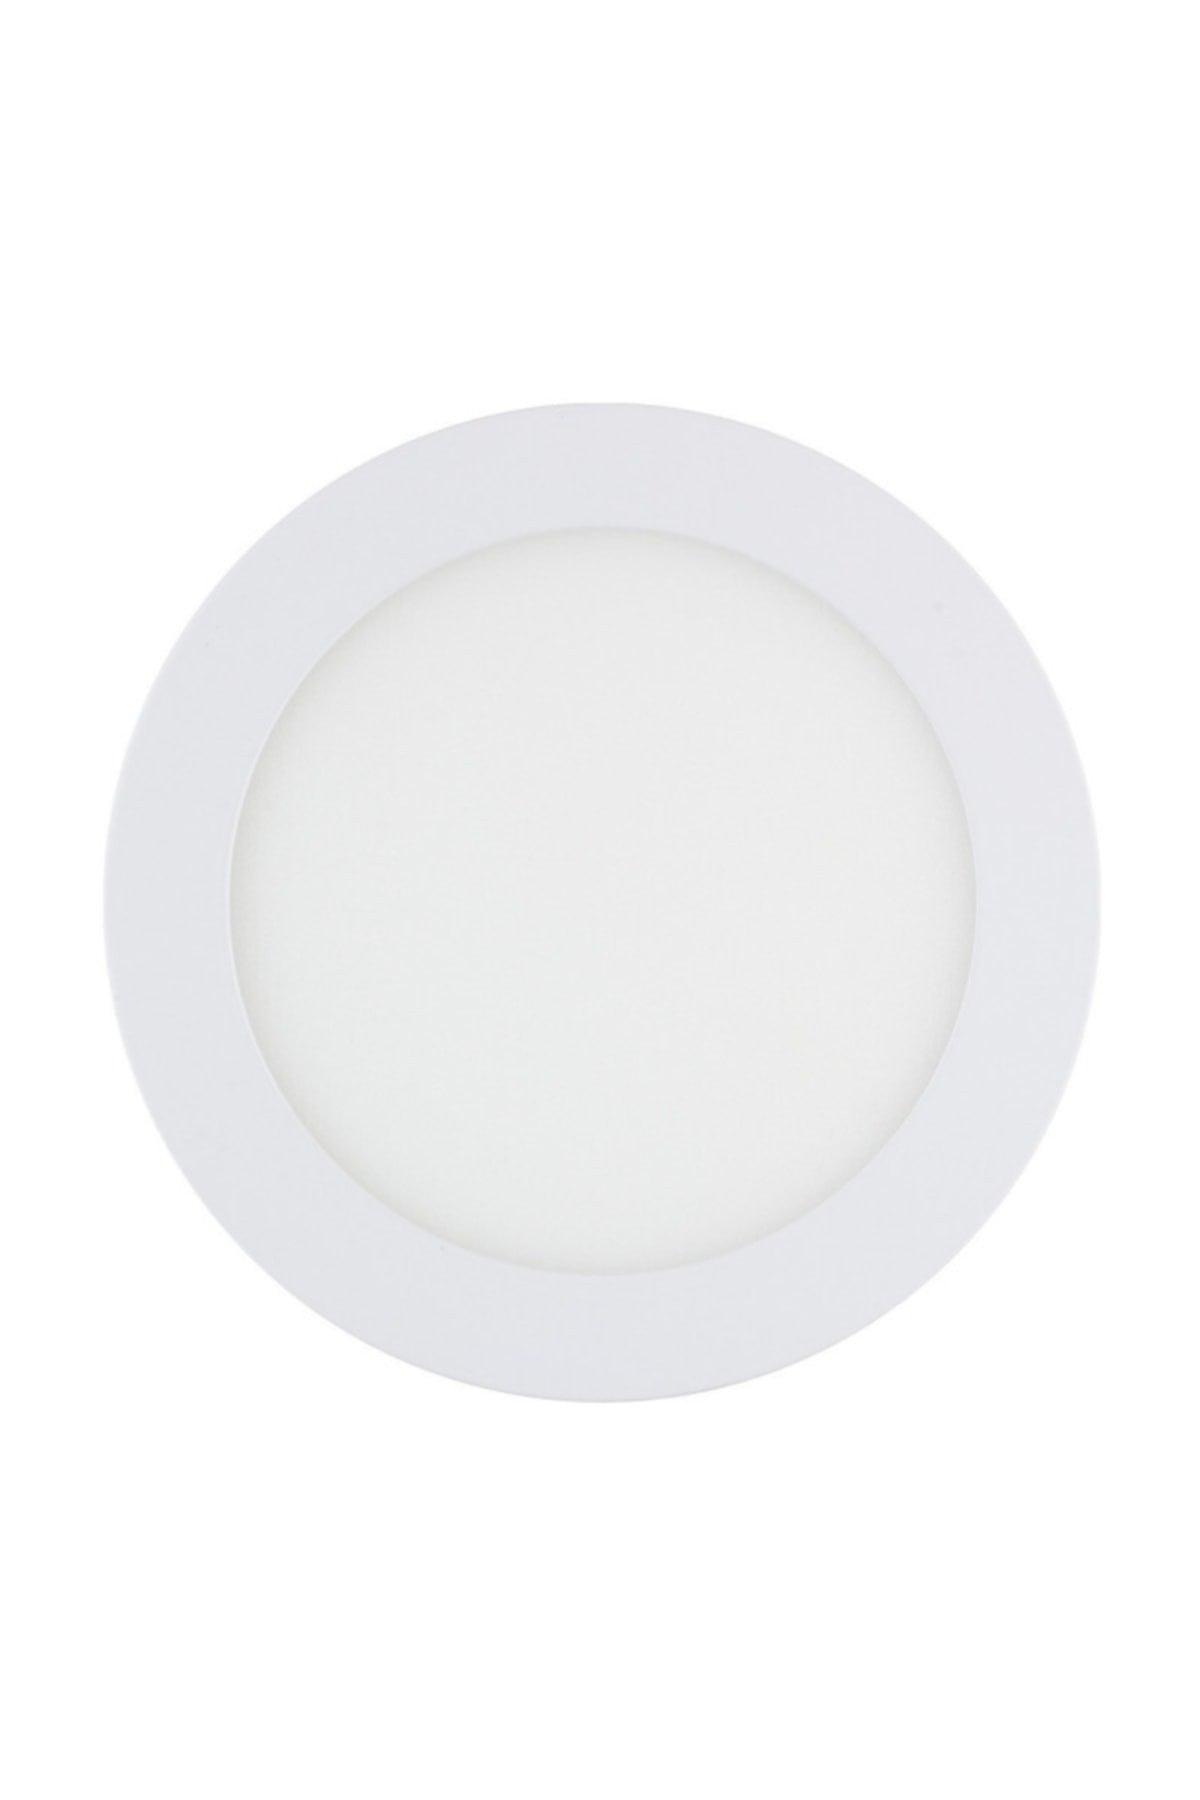 9w Recessed Led Panel Deluxe White (10pcs)